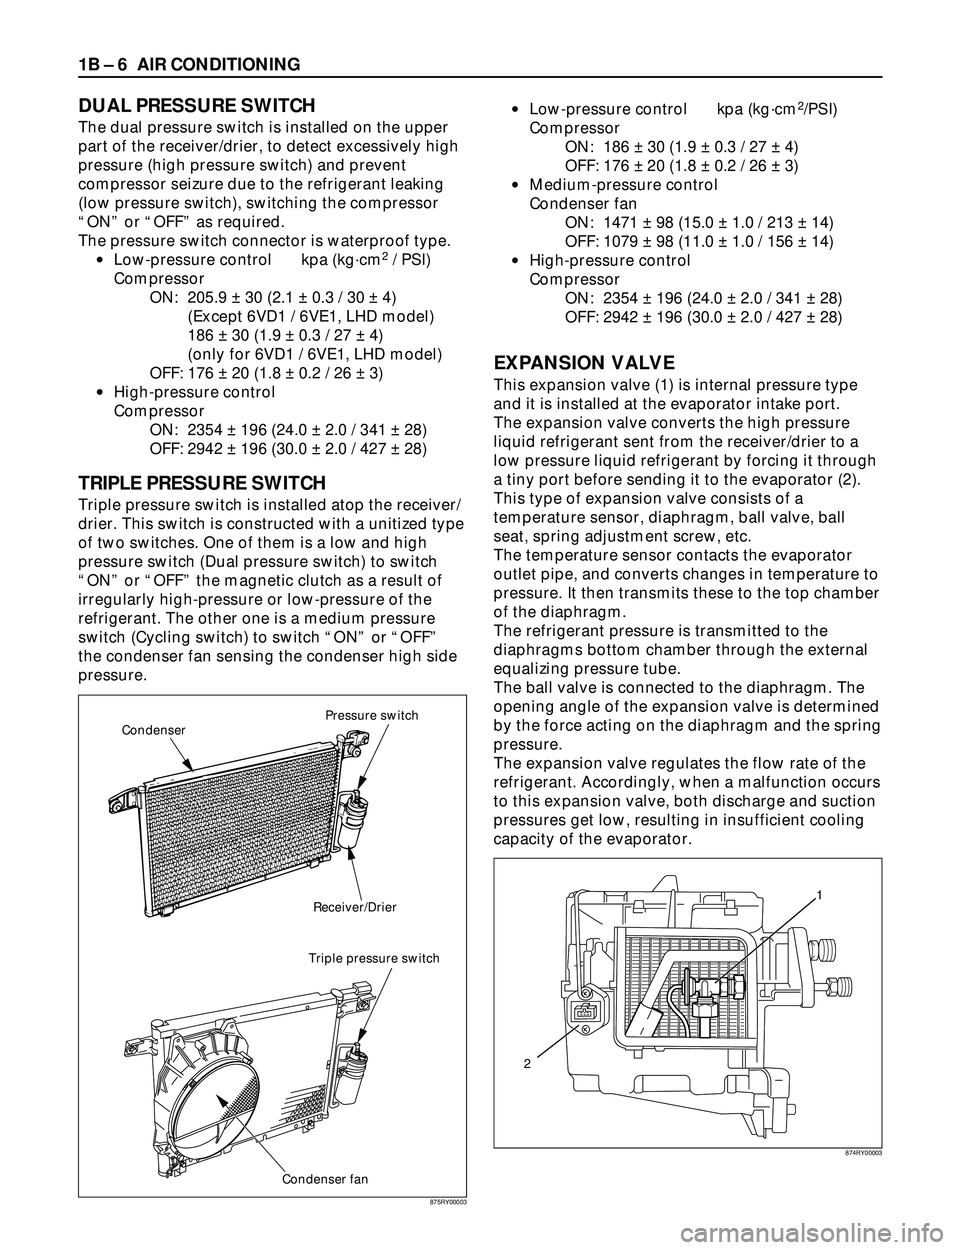 ISUZU TROOPER 1998  Service Repair Manual 1B Ð 6 AIR CONDITIONING
DUAL PRESSURE SWITCH
The dual pressure switch is installed on the upper
part of the receiver/drier, to detect excessively high
pressure (high pressure switch) and prevent
comp